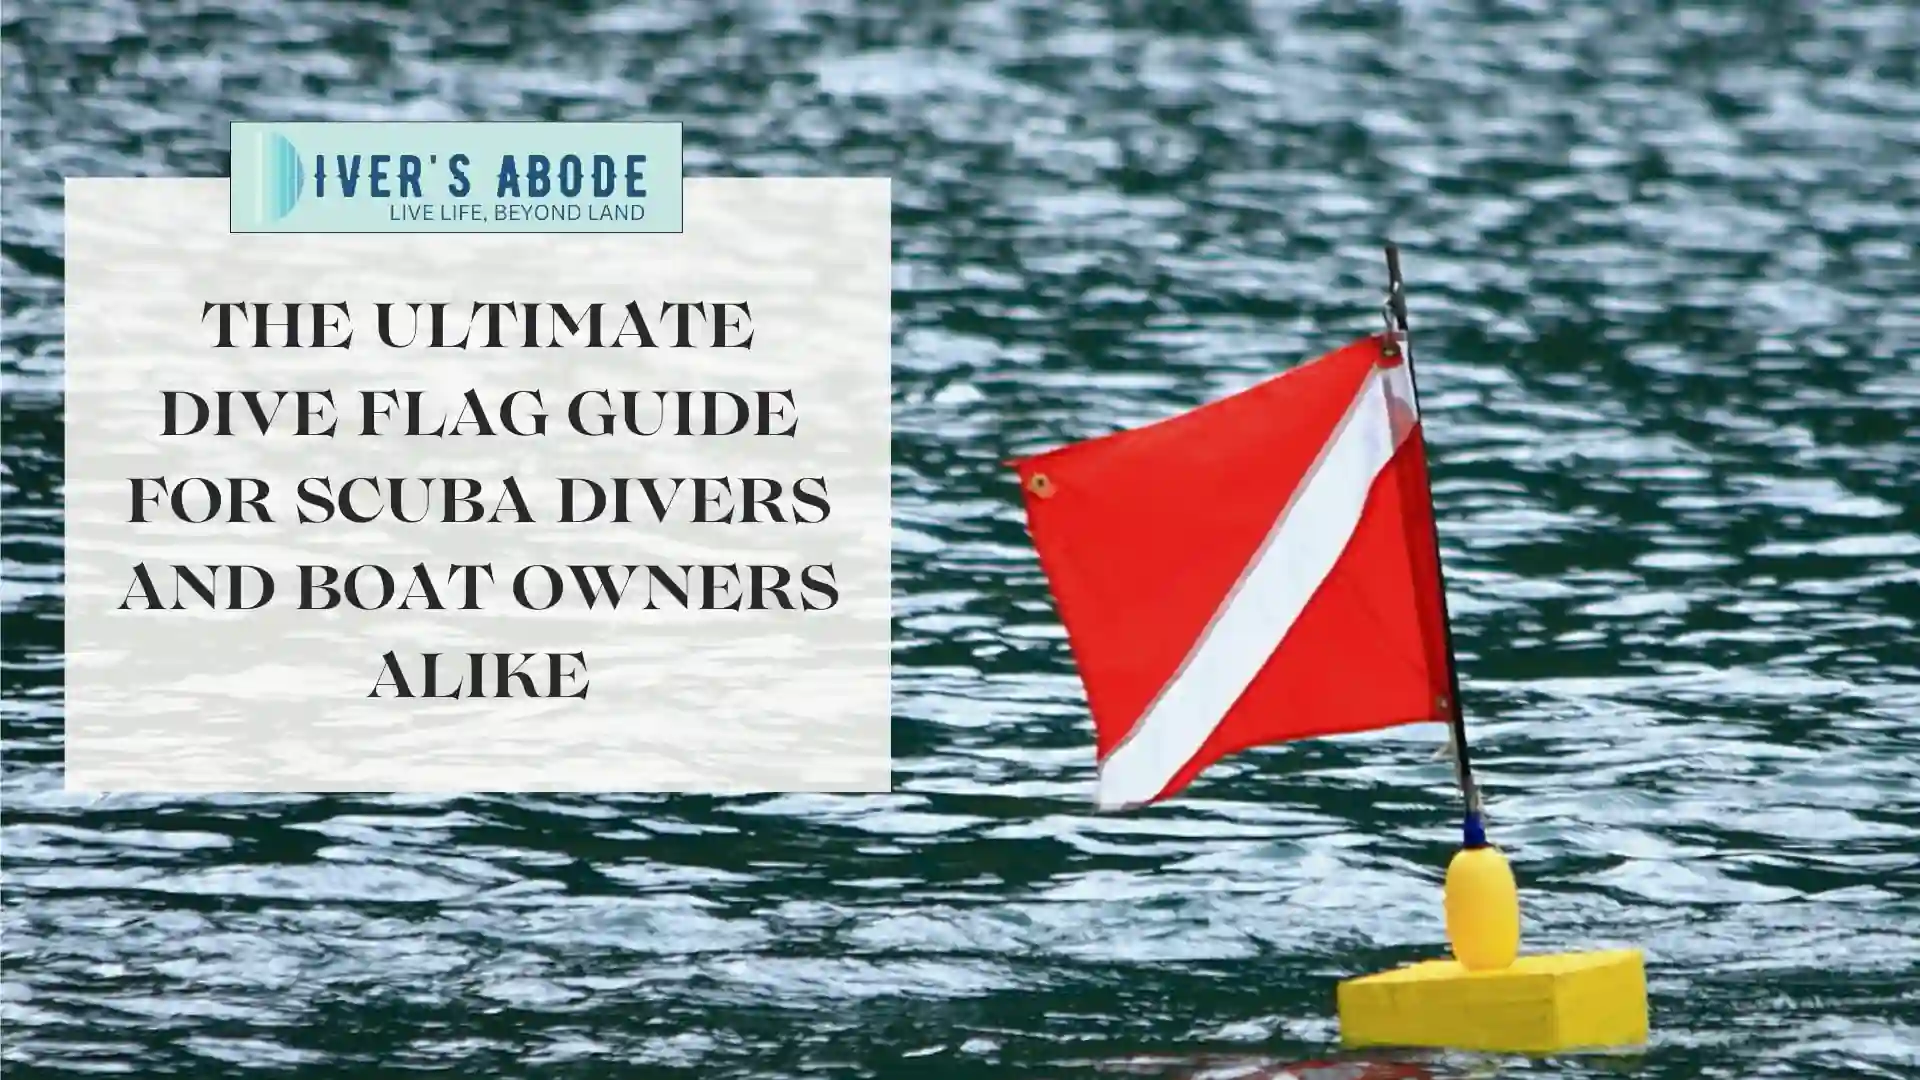 The Ultimate Dive Flag Guide For Scuba Divers And Boat Owners